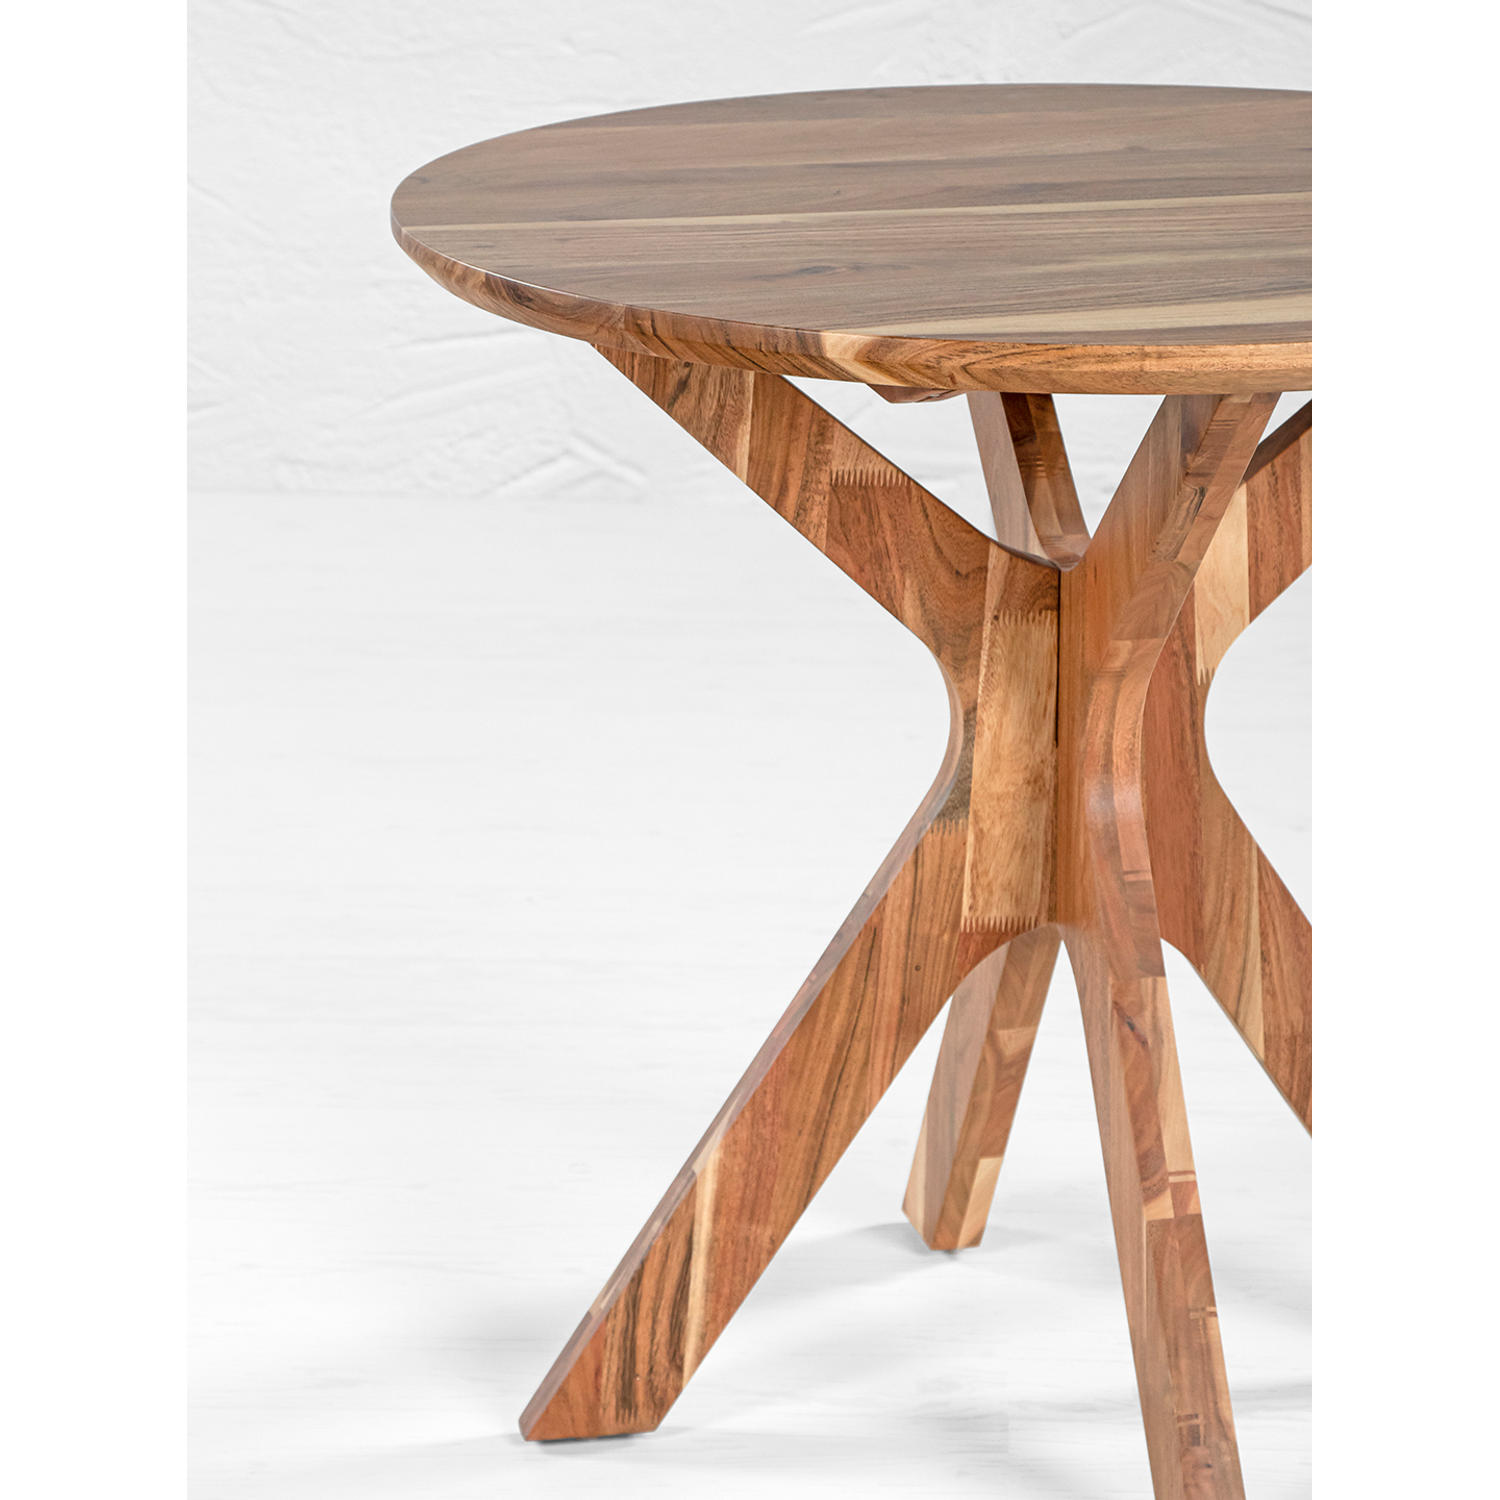 X Wooden Coffee Table